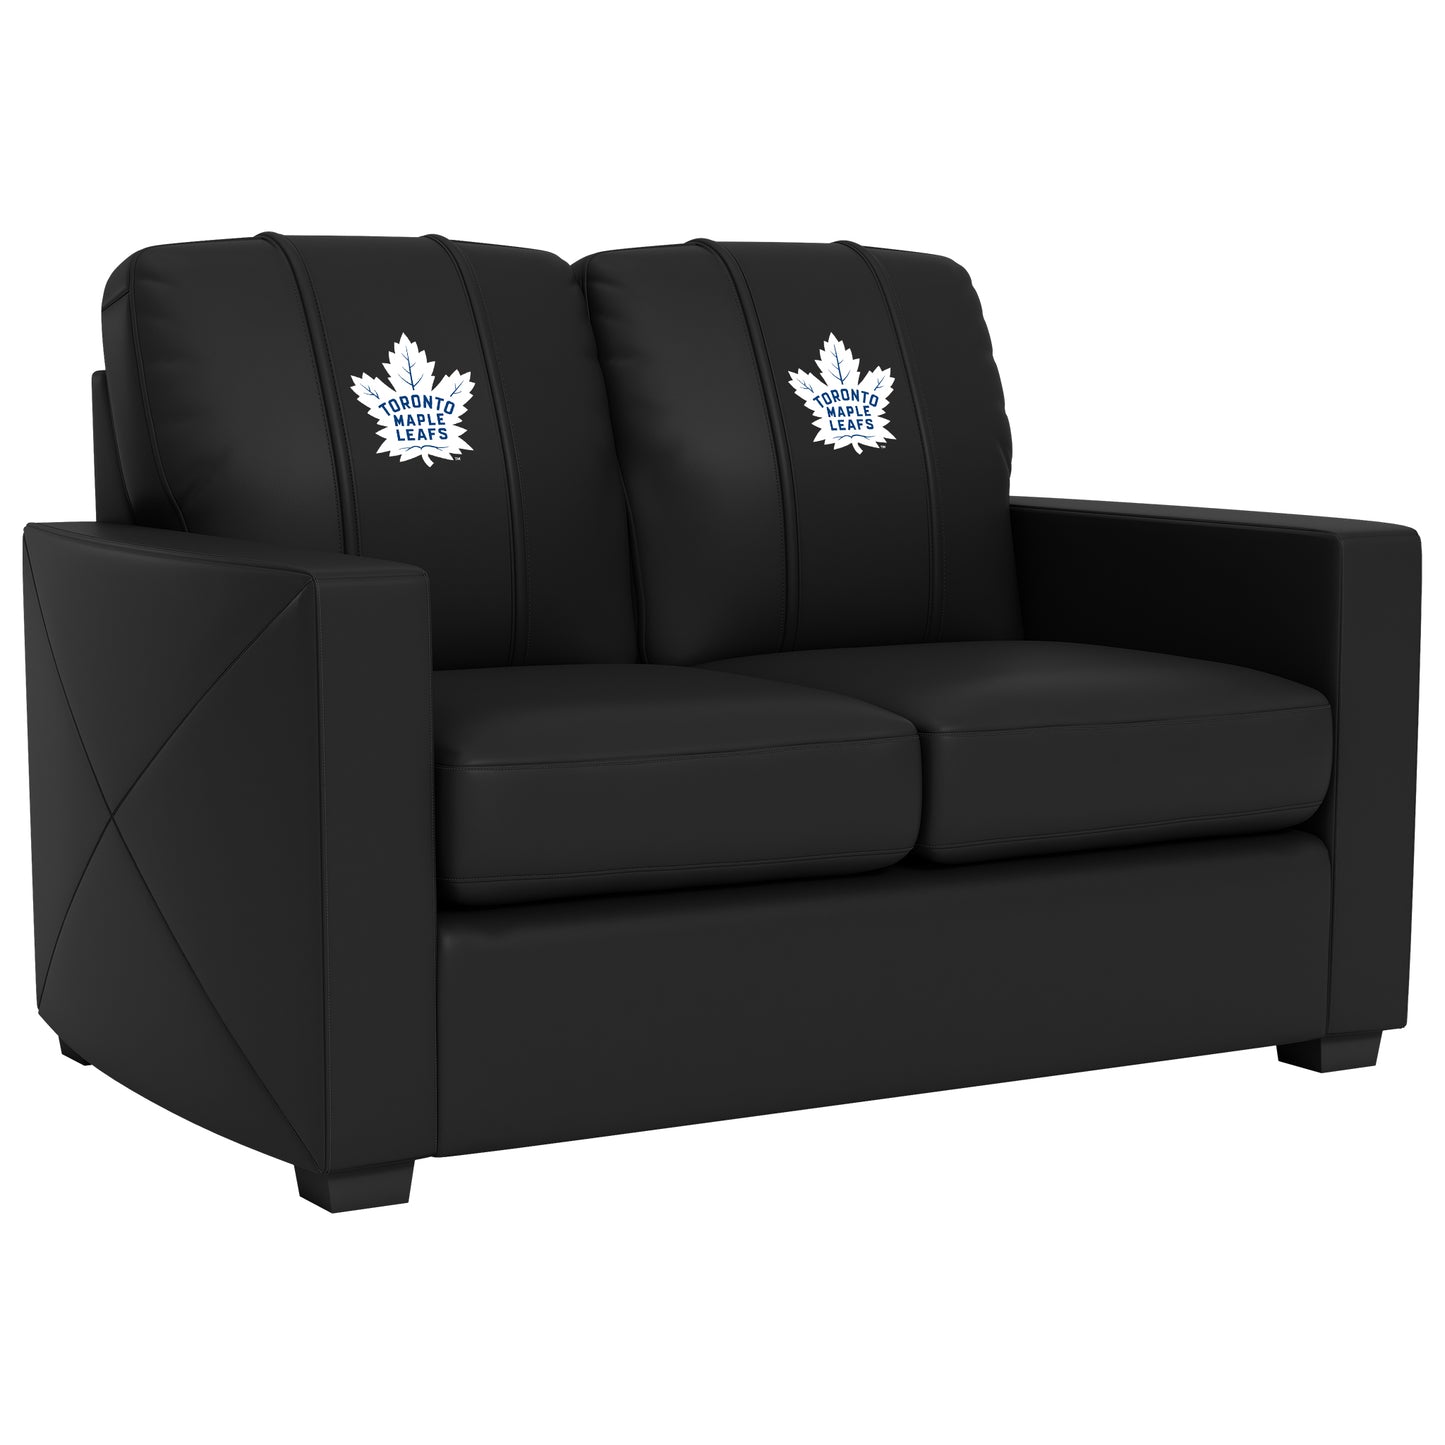 Silver Loveseat with Toronto Maple Leafs Logo